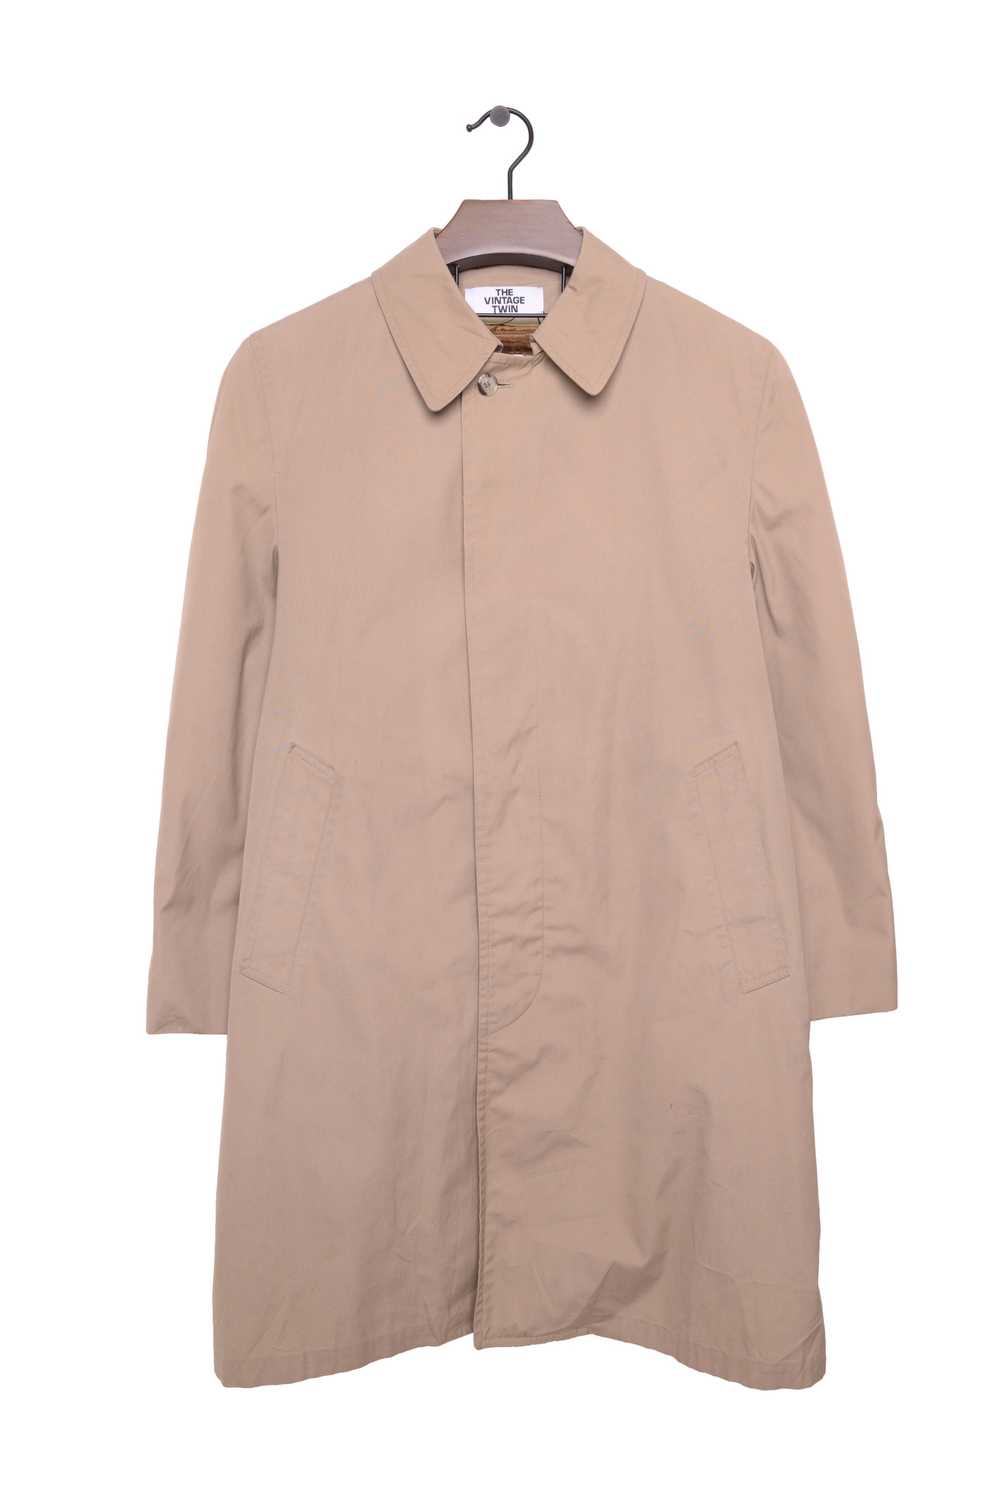 1980s Lined Trench Coat - image 1